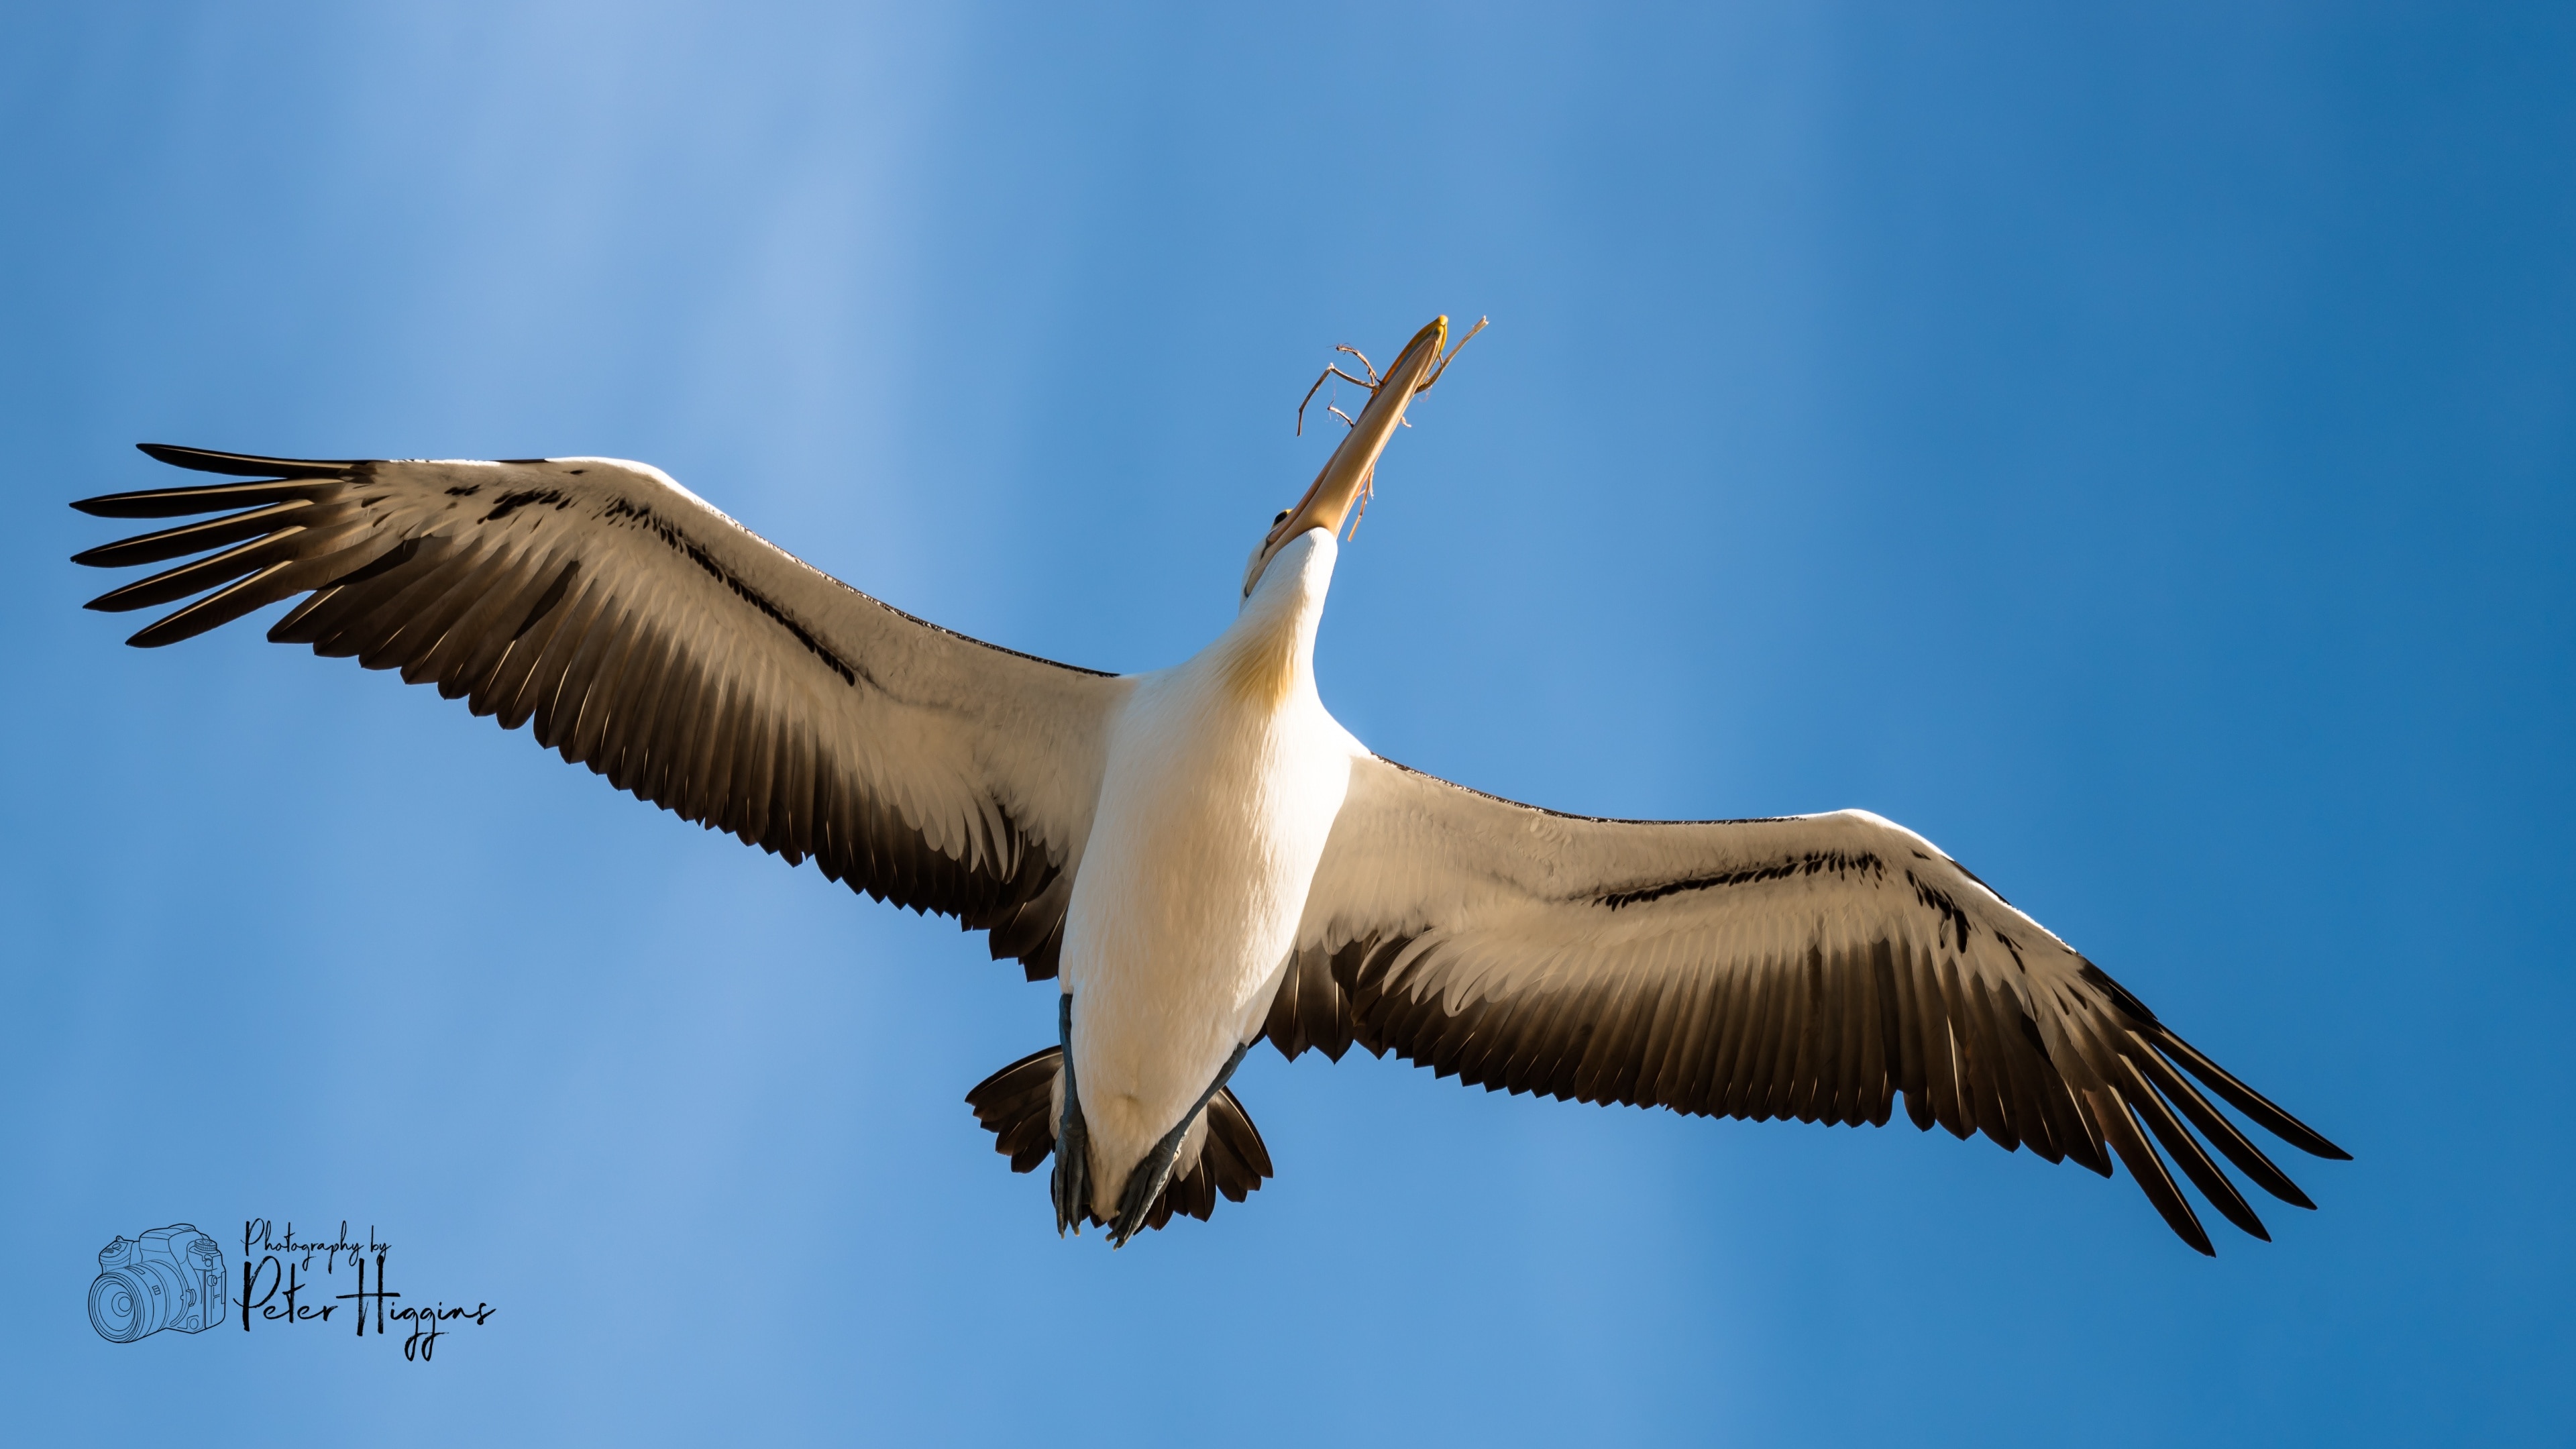 Testing out my 150-600mm lens skills on the Pelican colony at the north end of the island.  This shot was from the beach on the east side looking straight up as they swirl overhead.
Yes its nesting season, hence the vegitation in the beak.